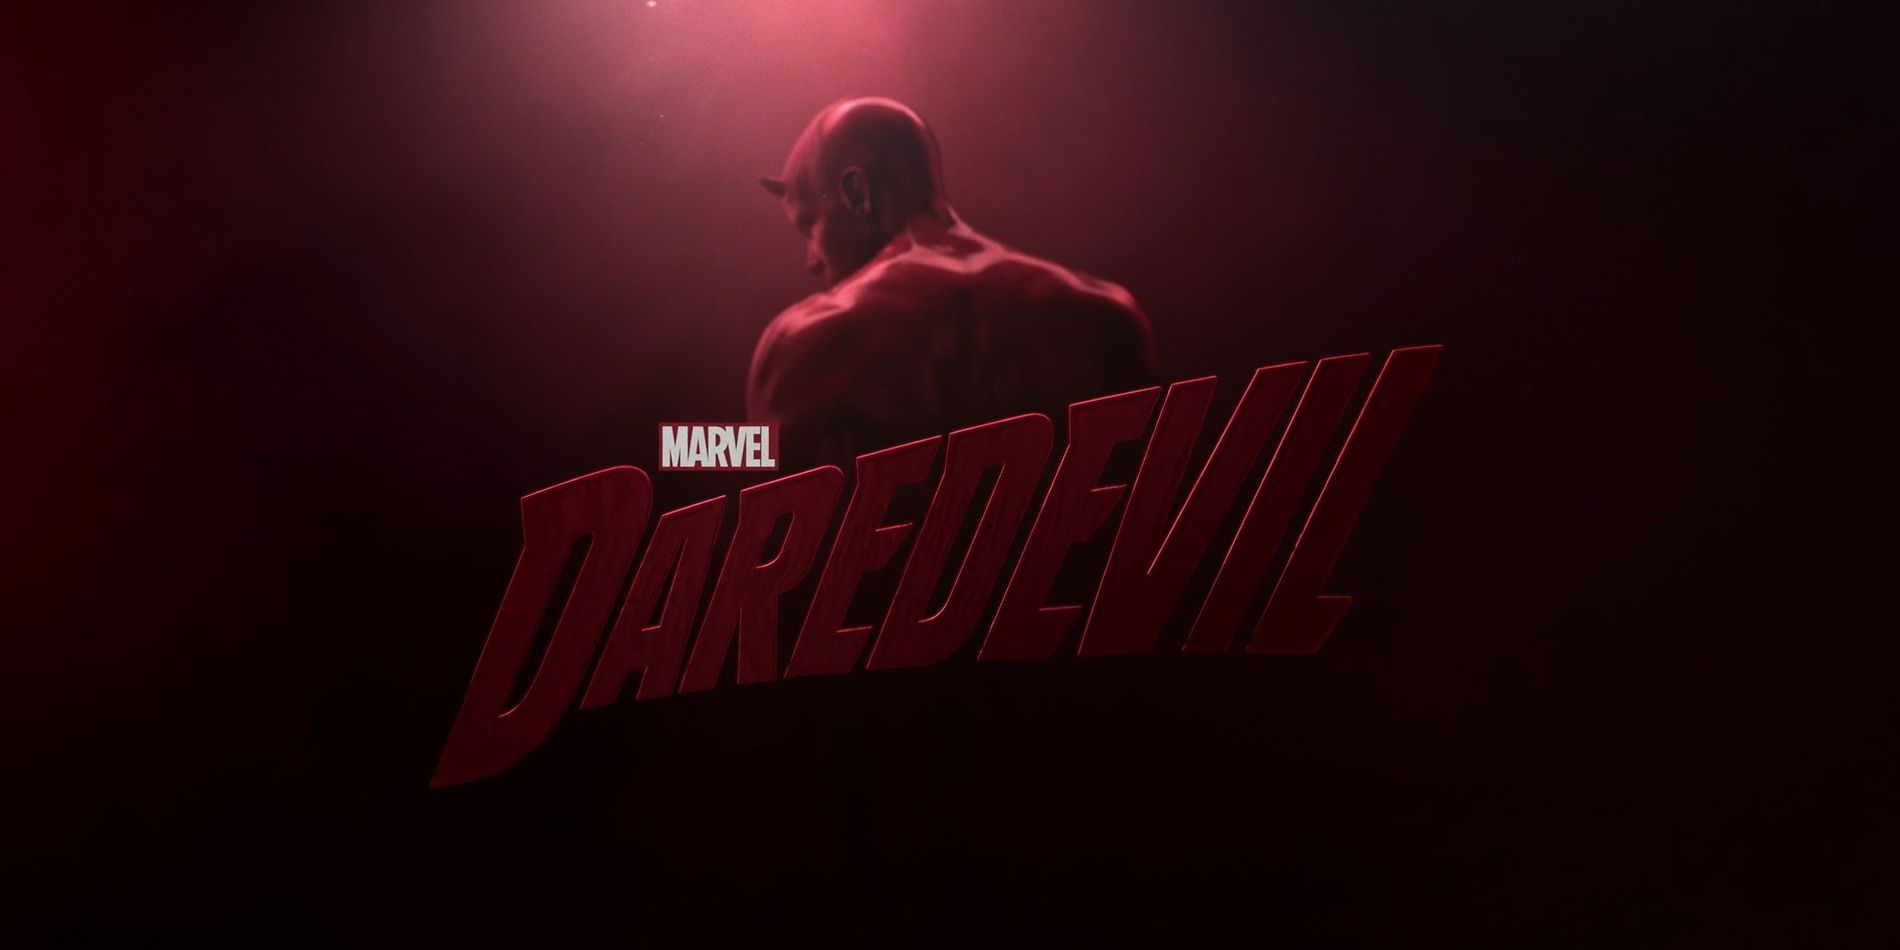 Title card for Netflix's Daredevil series